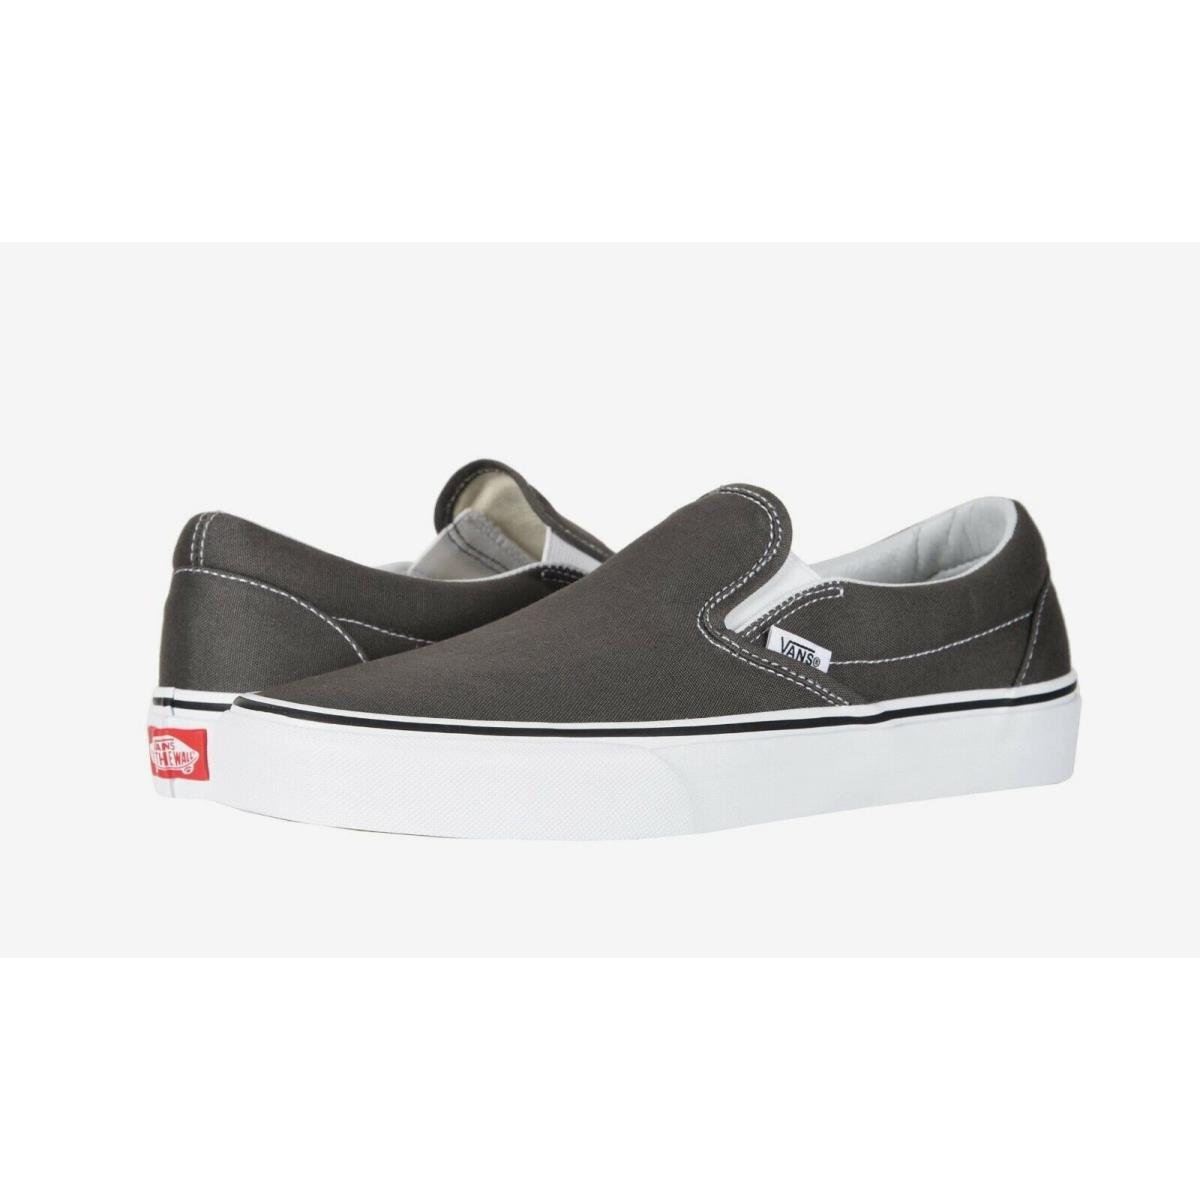 Vans Classic Canvas Slip On Charcoal Gray Skate Sneaker Shoes